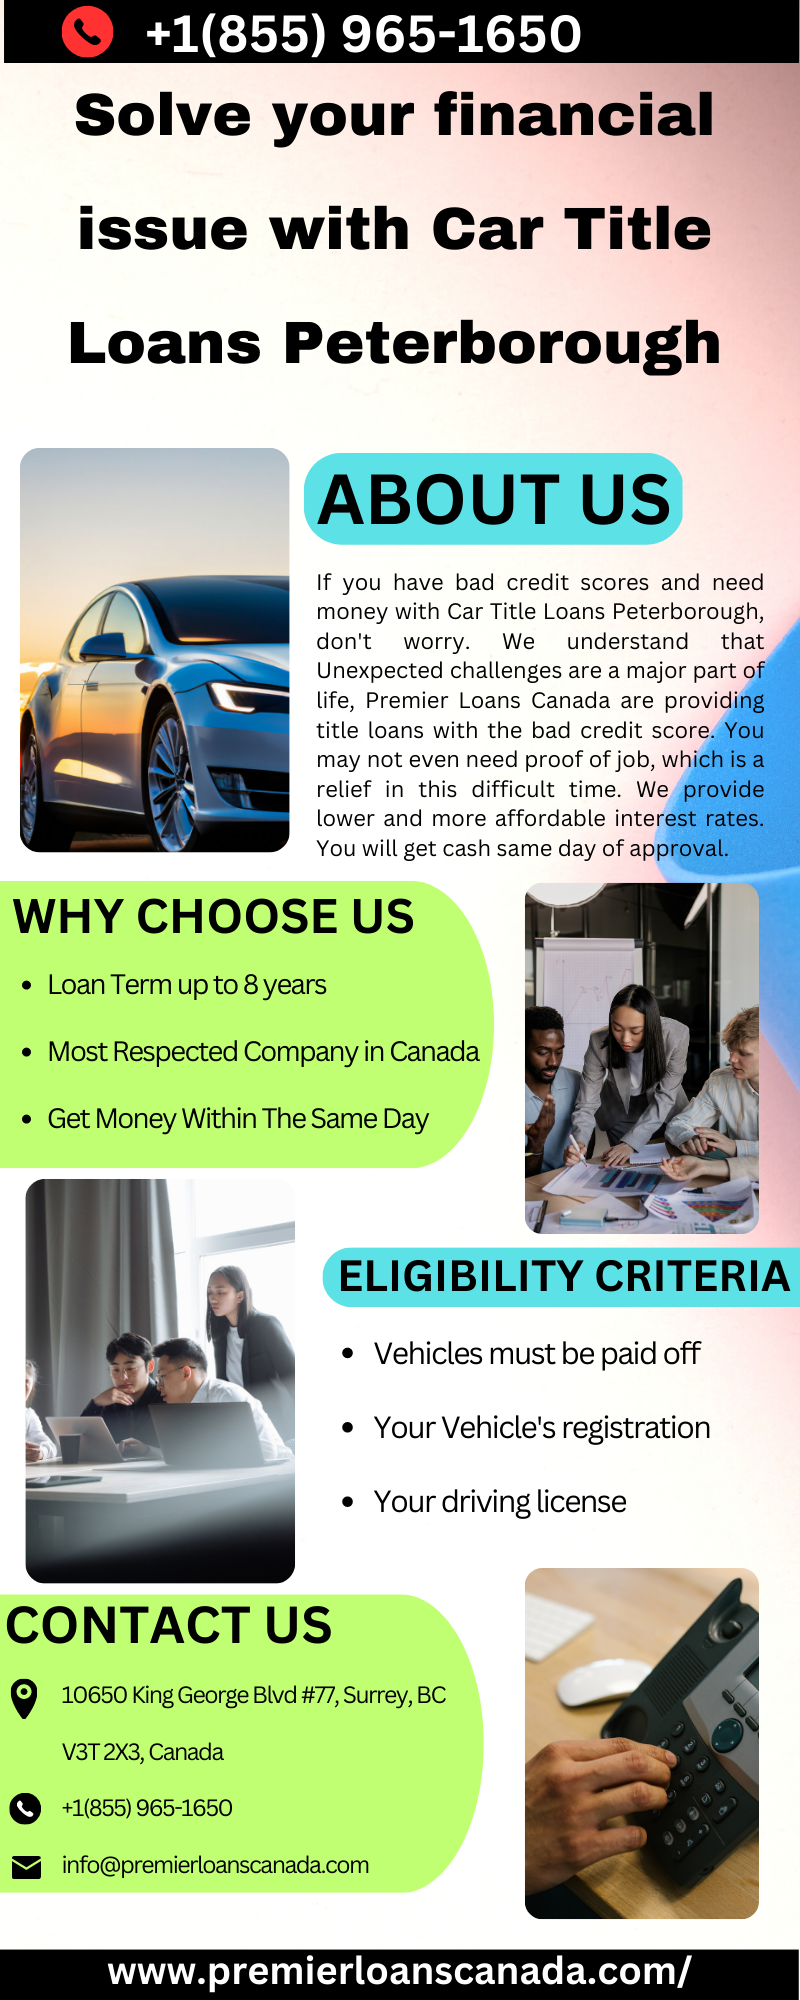 Solve your financial issue with Car Title Loans Peterborough